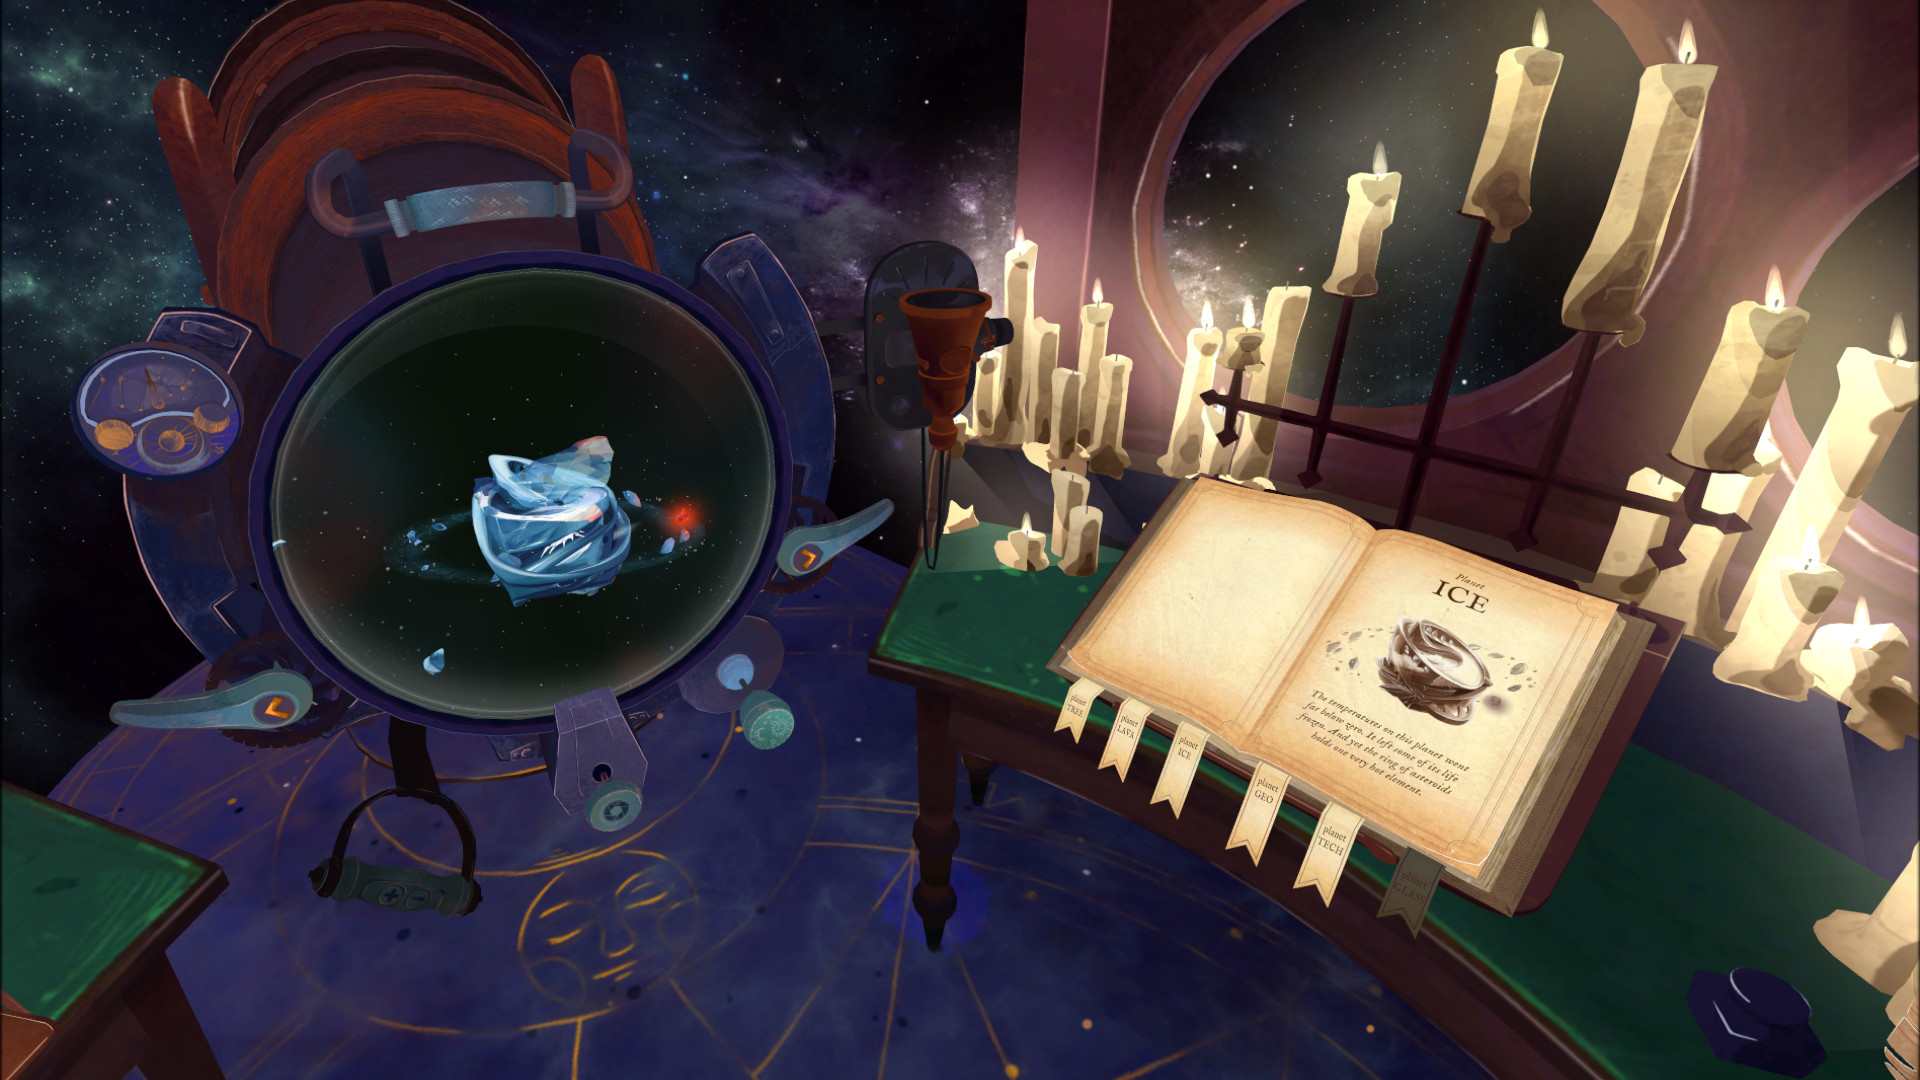 Stargaze Is a VR Adventure Headed To Steam Near The End of 2020, Experience A Magical Journey Through The Stars